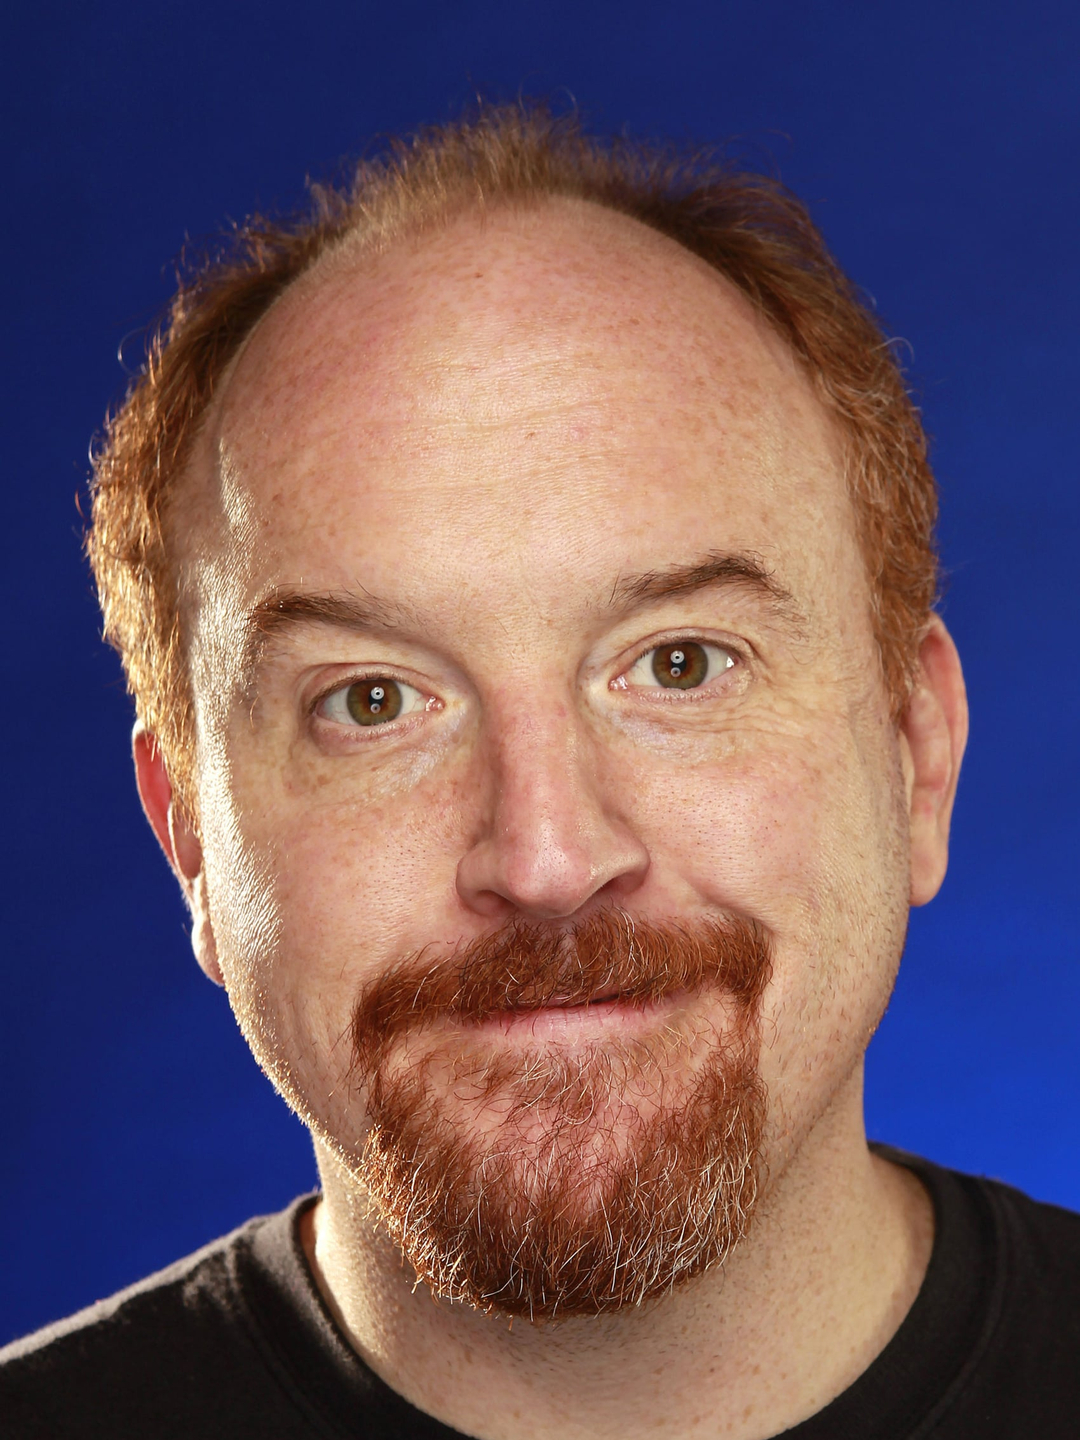 Louis C.K. dating history